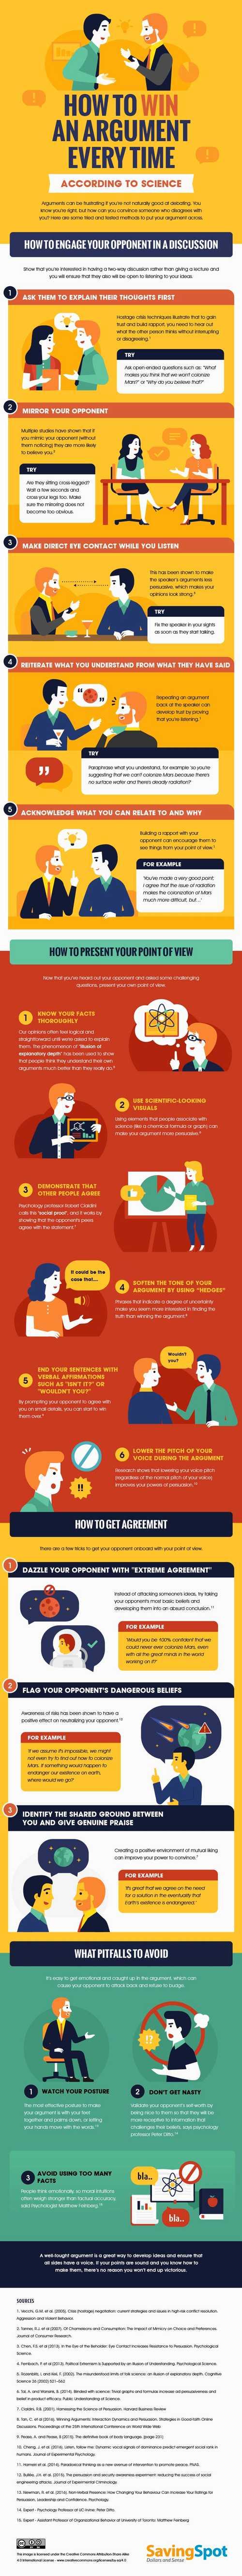 How to Win an Argument, According to Science